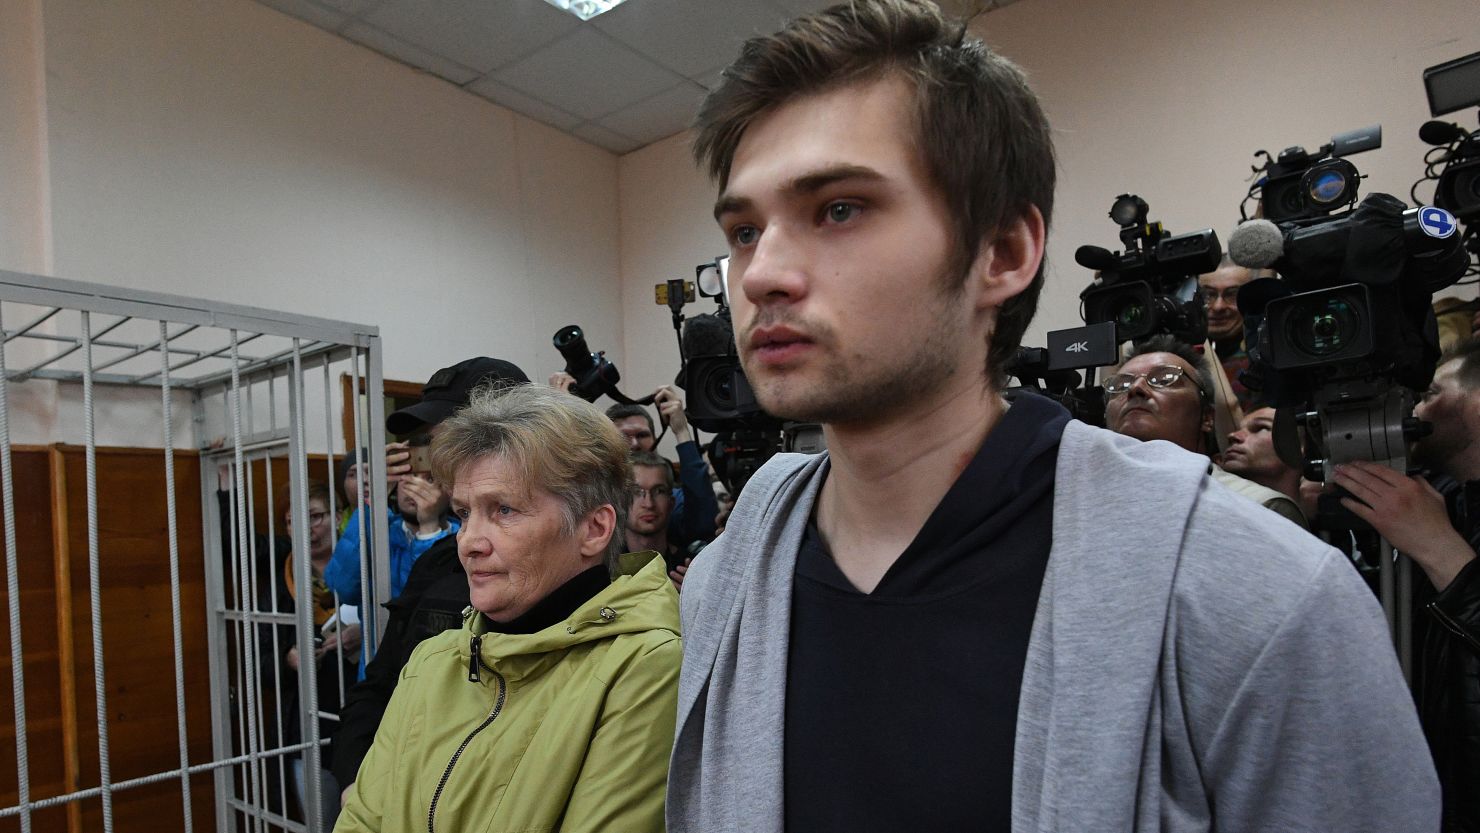 Russian blogger Ruslan Sokolovsky, right, attends a court hearing Thursday after he was charged for filming a Pokemon Go video in a church.